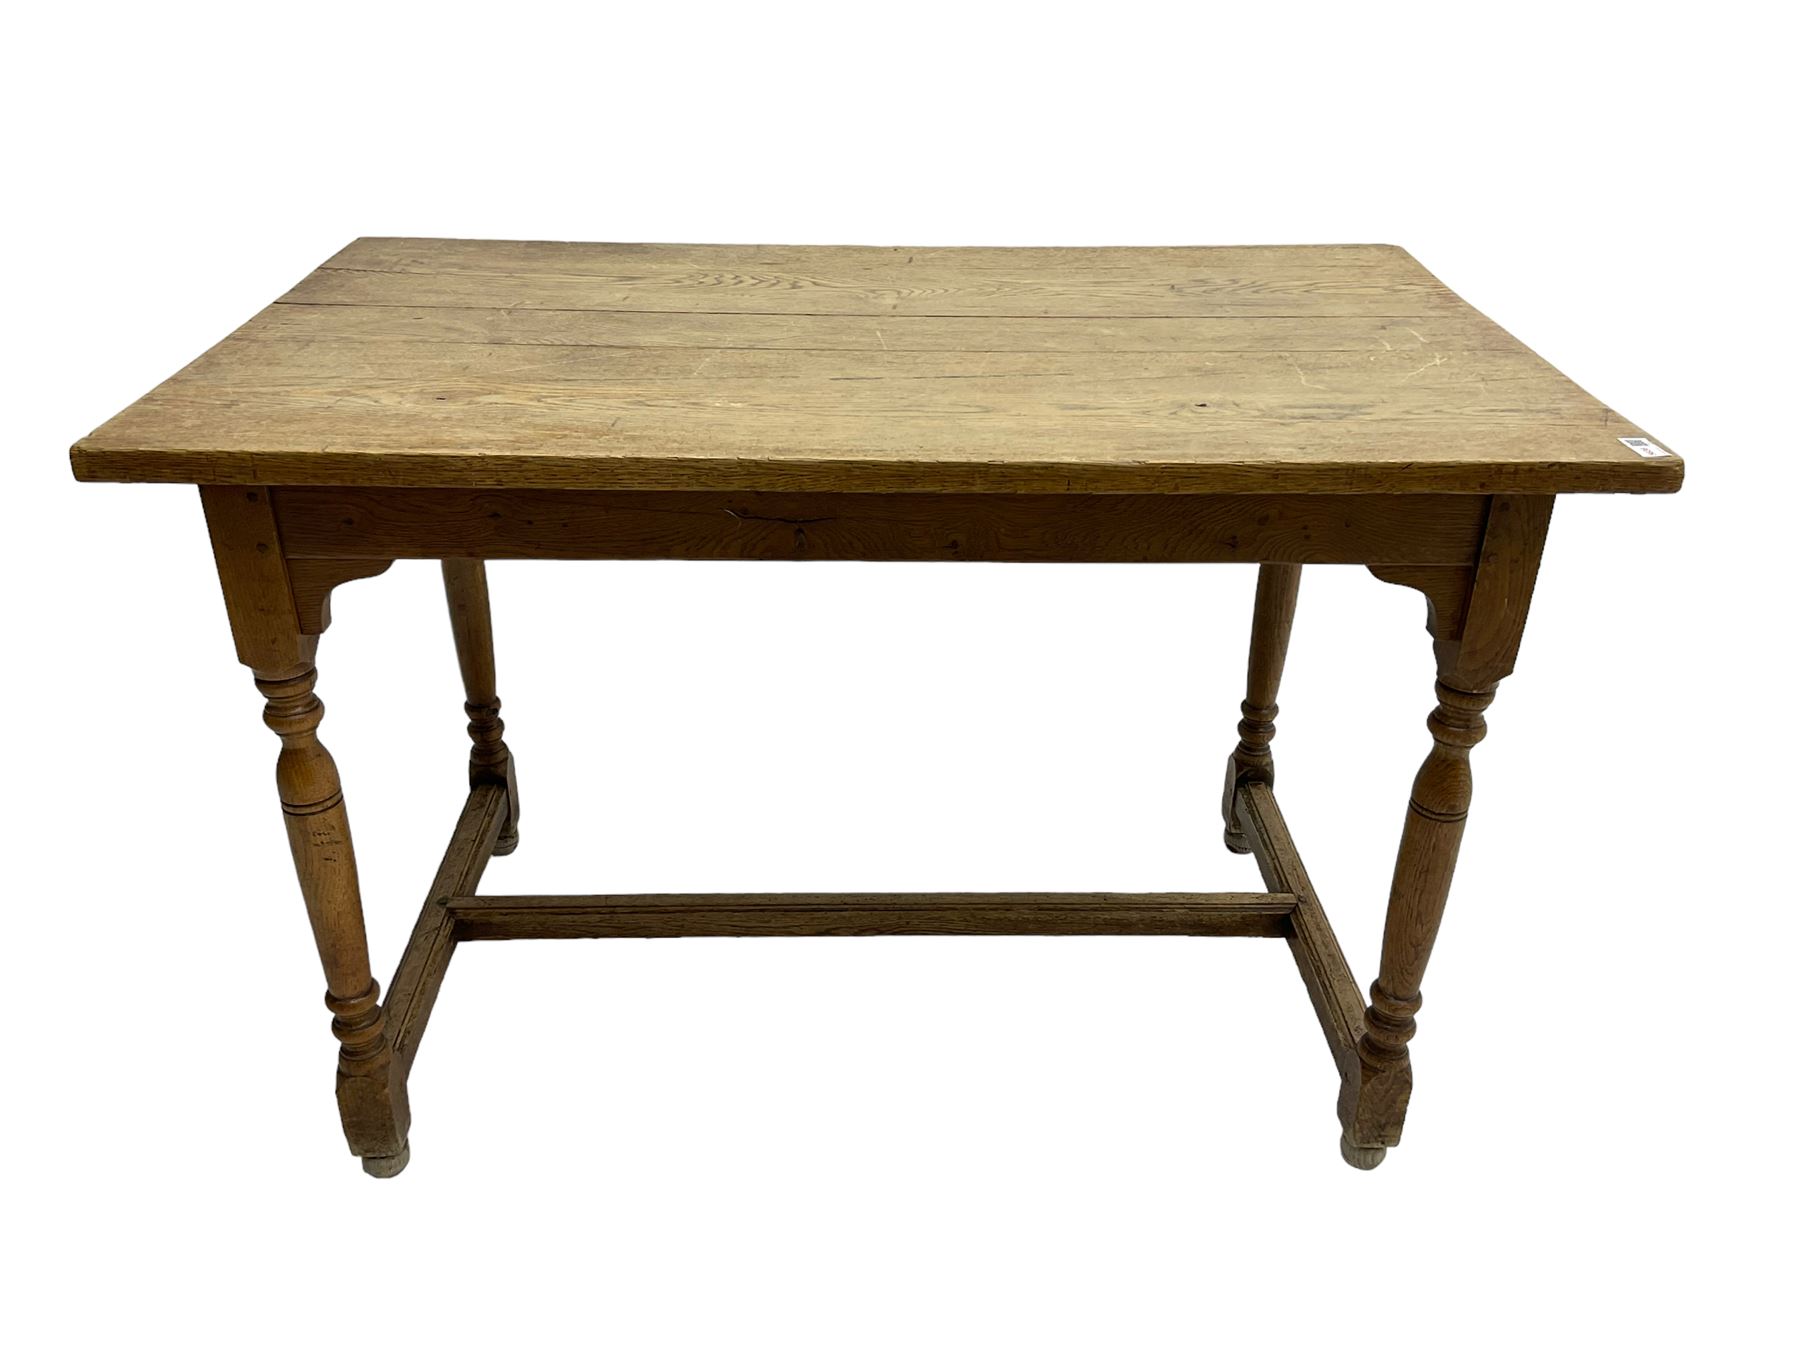 Early 20th century oak kitchen table - Image 2 of 4